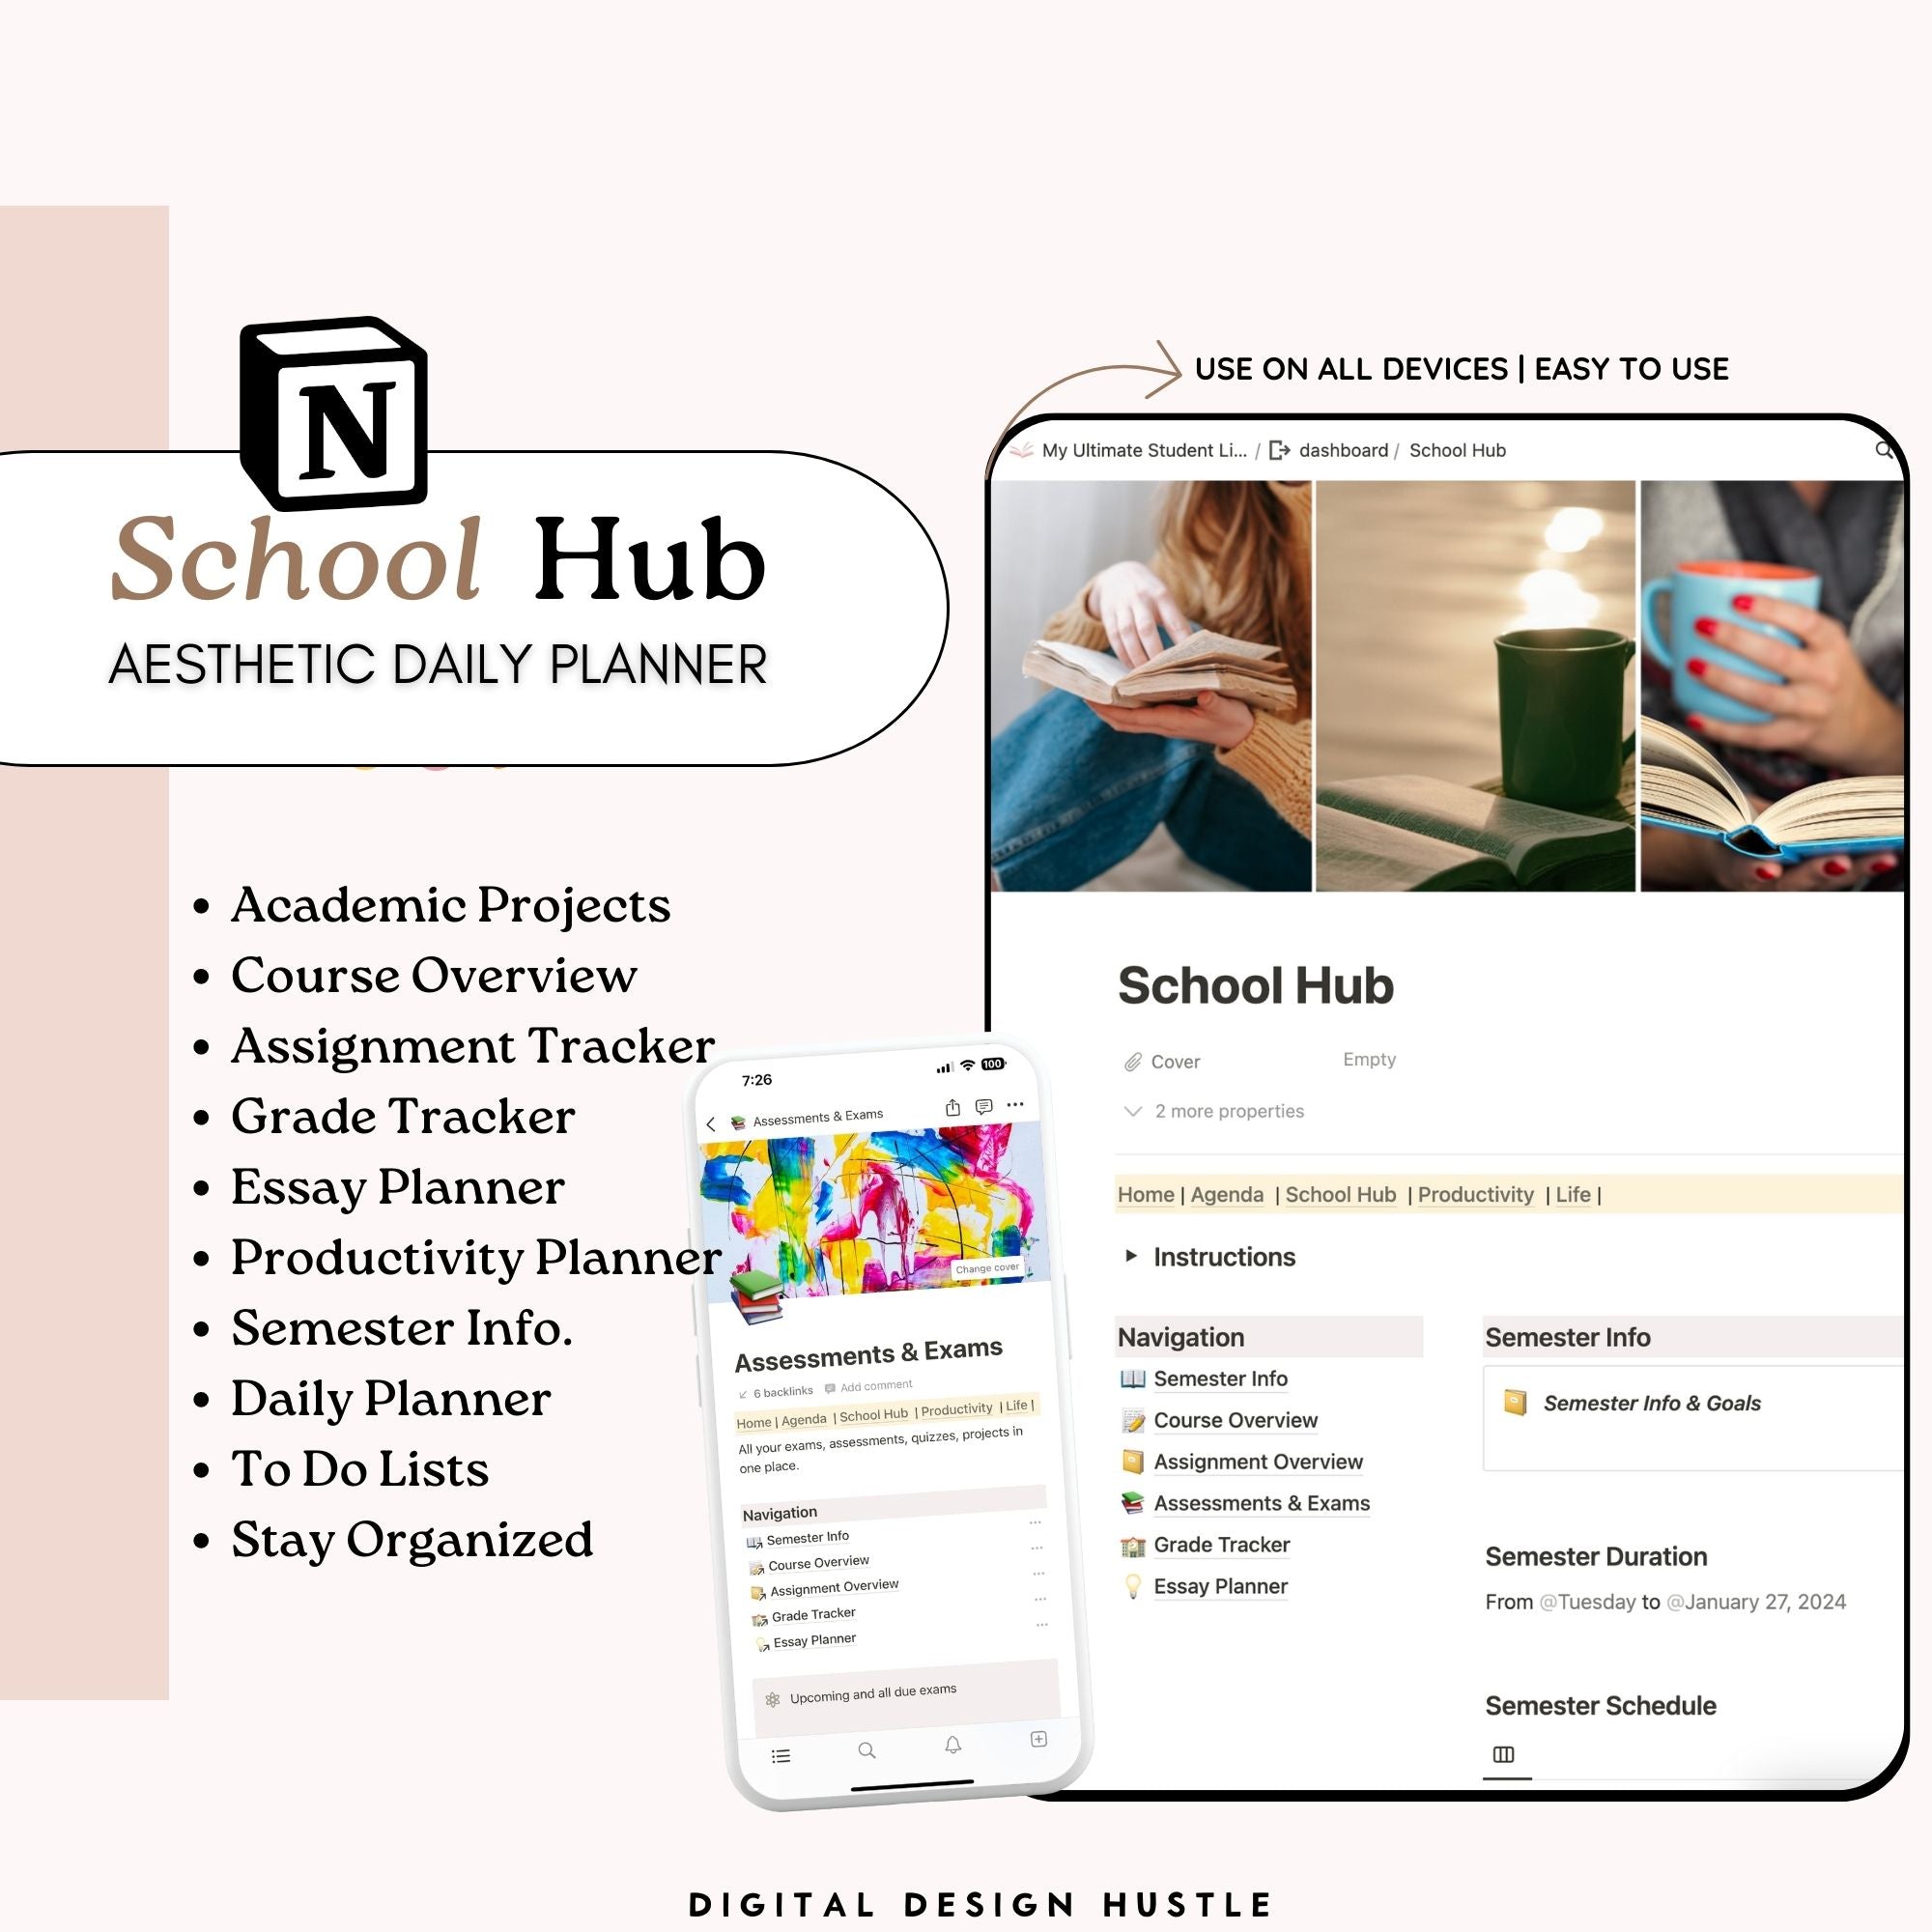 Notion Template Student Planner